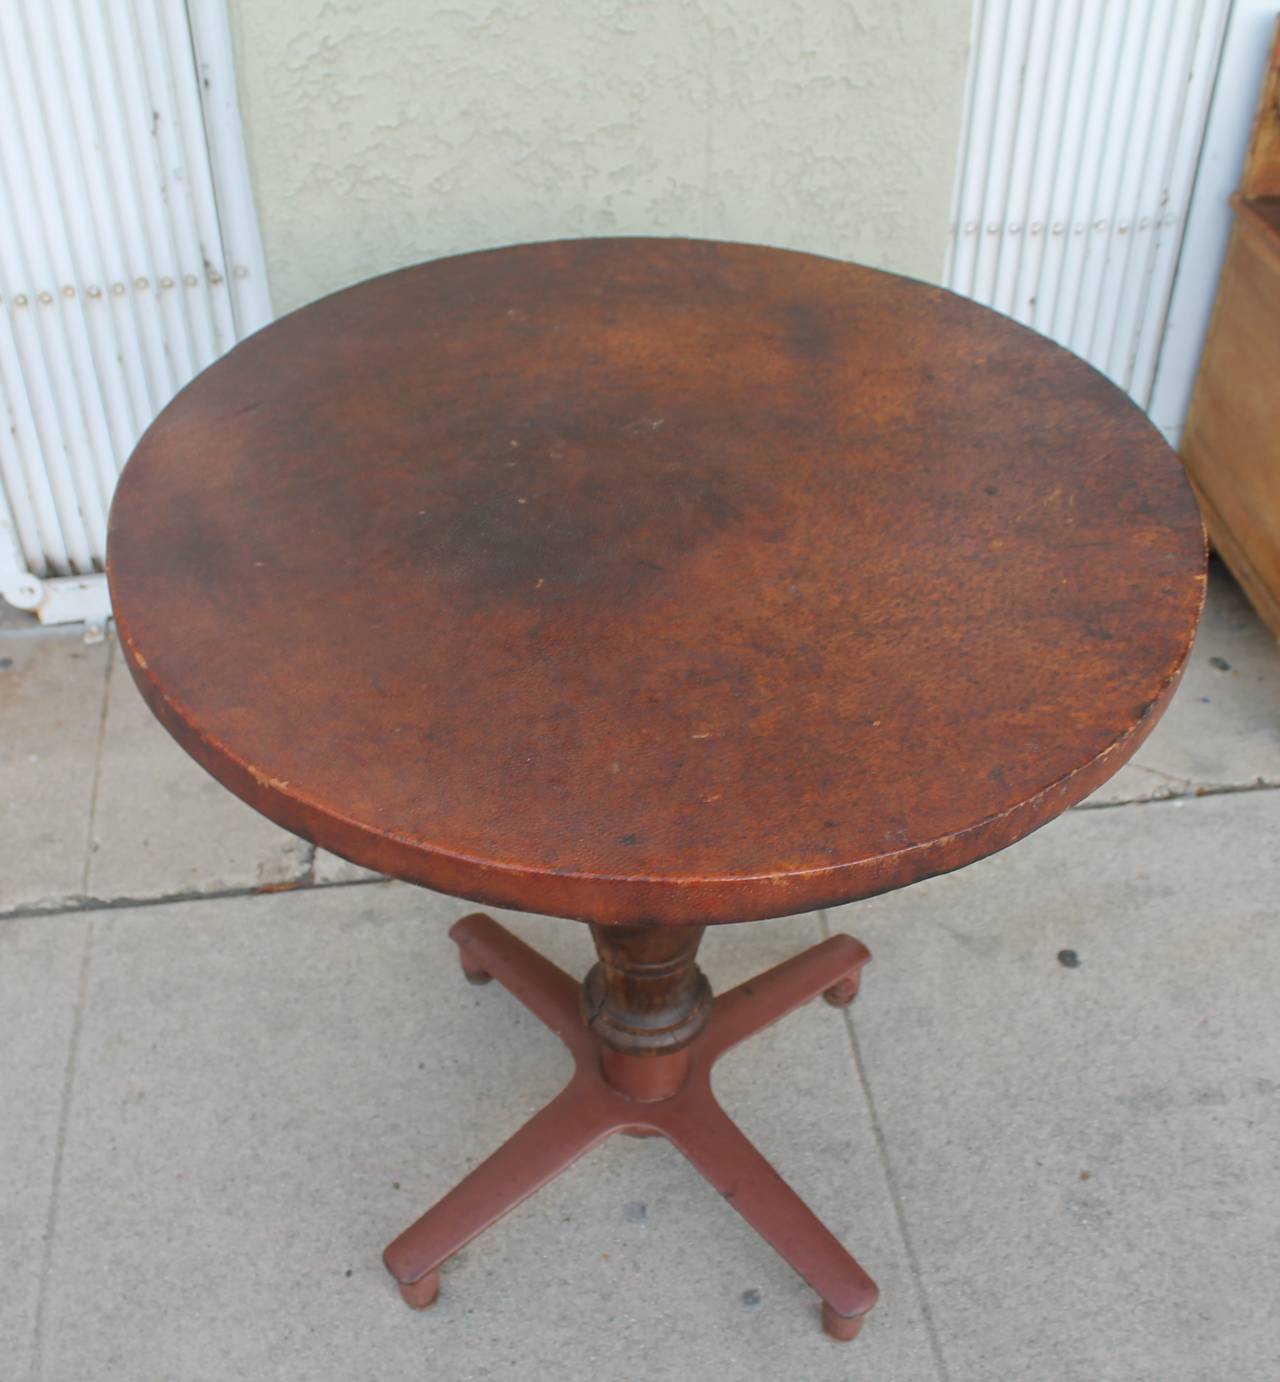 Adirondack Rustic 19th Century Industrial Gaming Table with a Leather Top